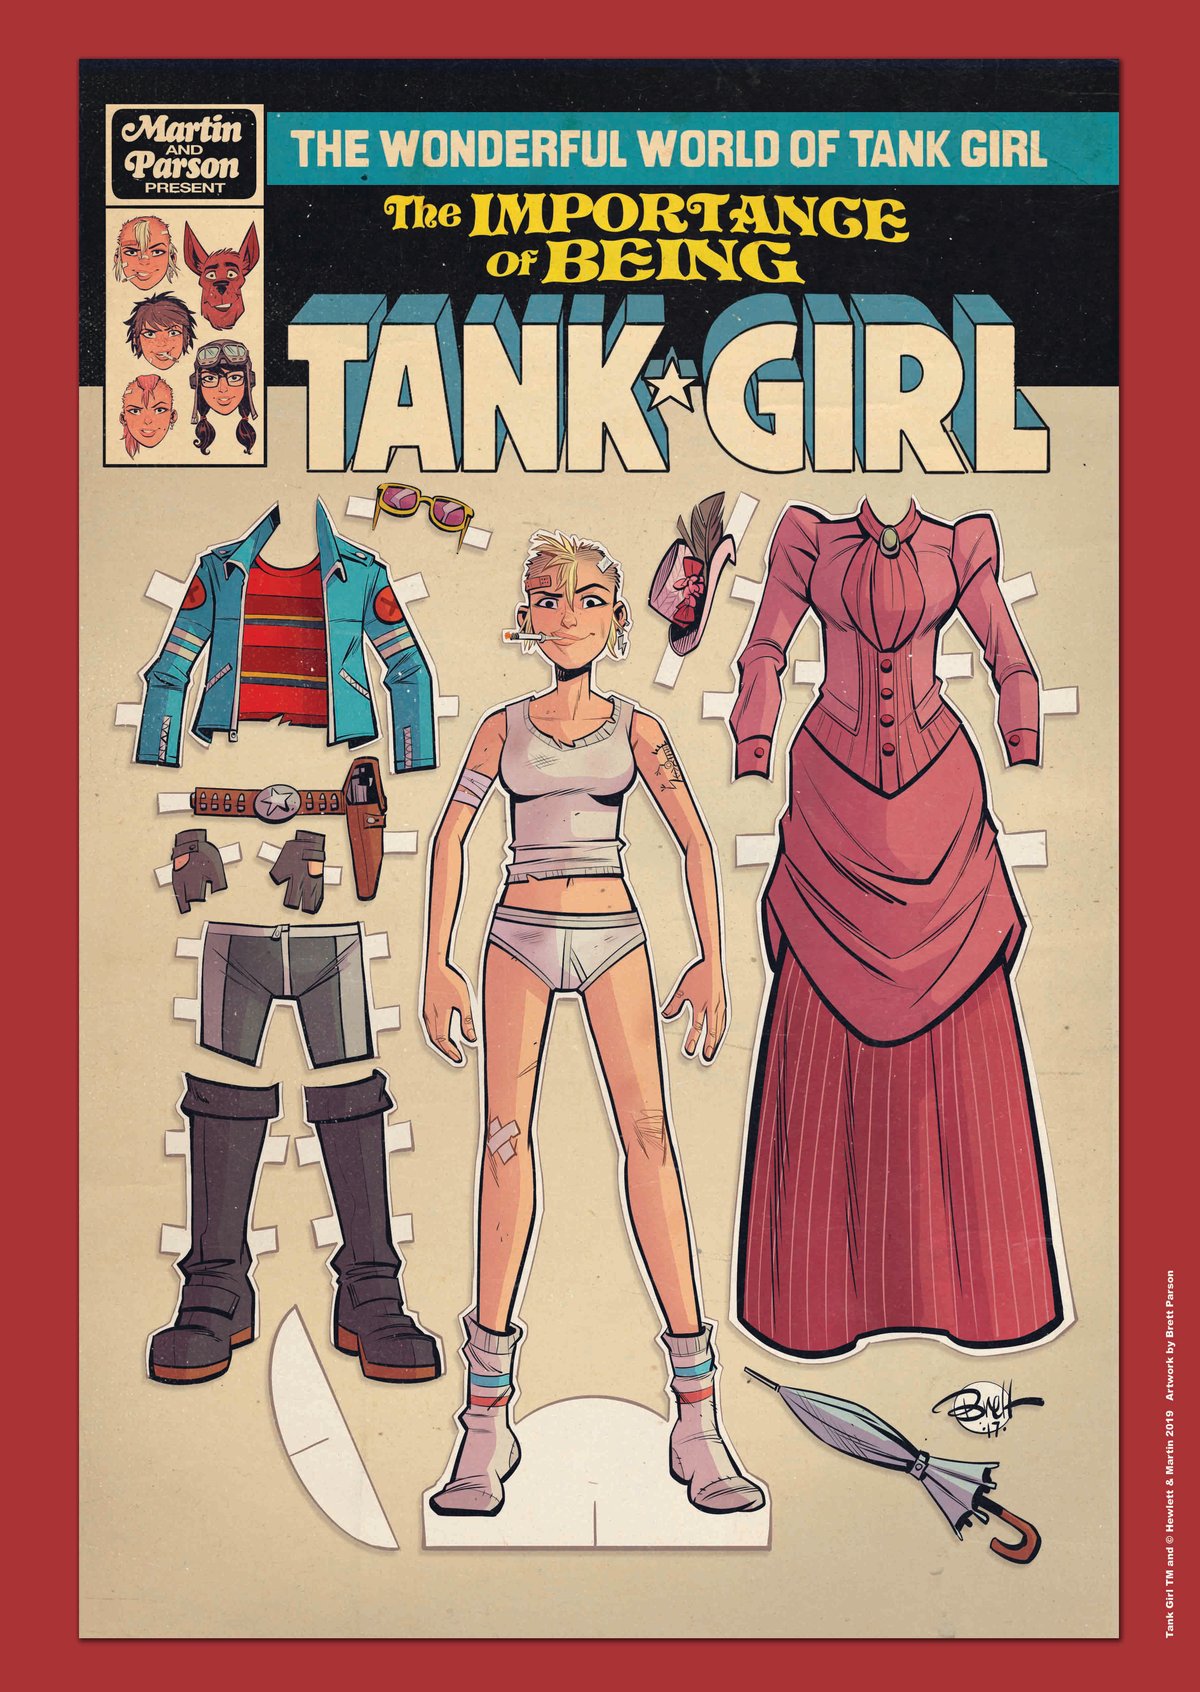 Image of "The Importance of Being Tank Girl" A2 Print - Hand Signed and Numbered with Bonus Print